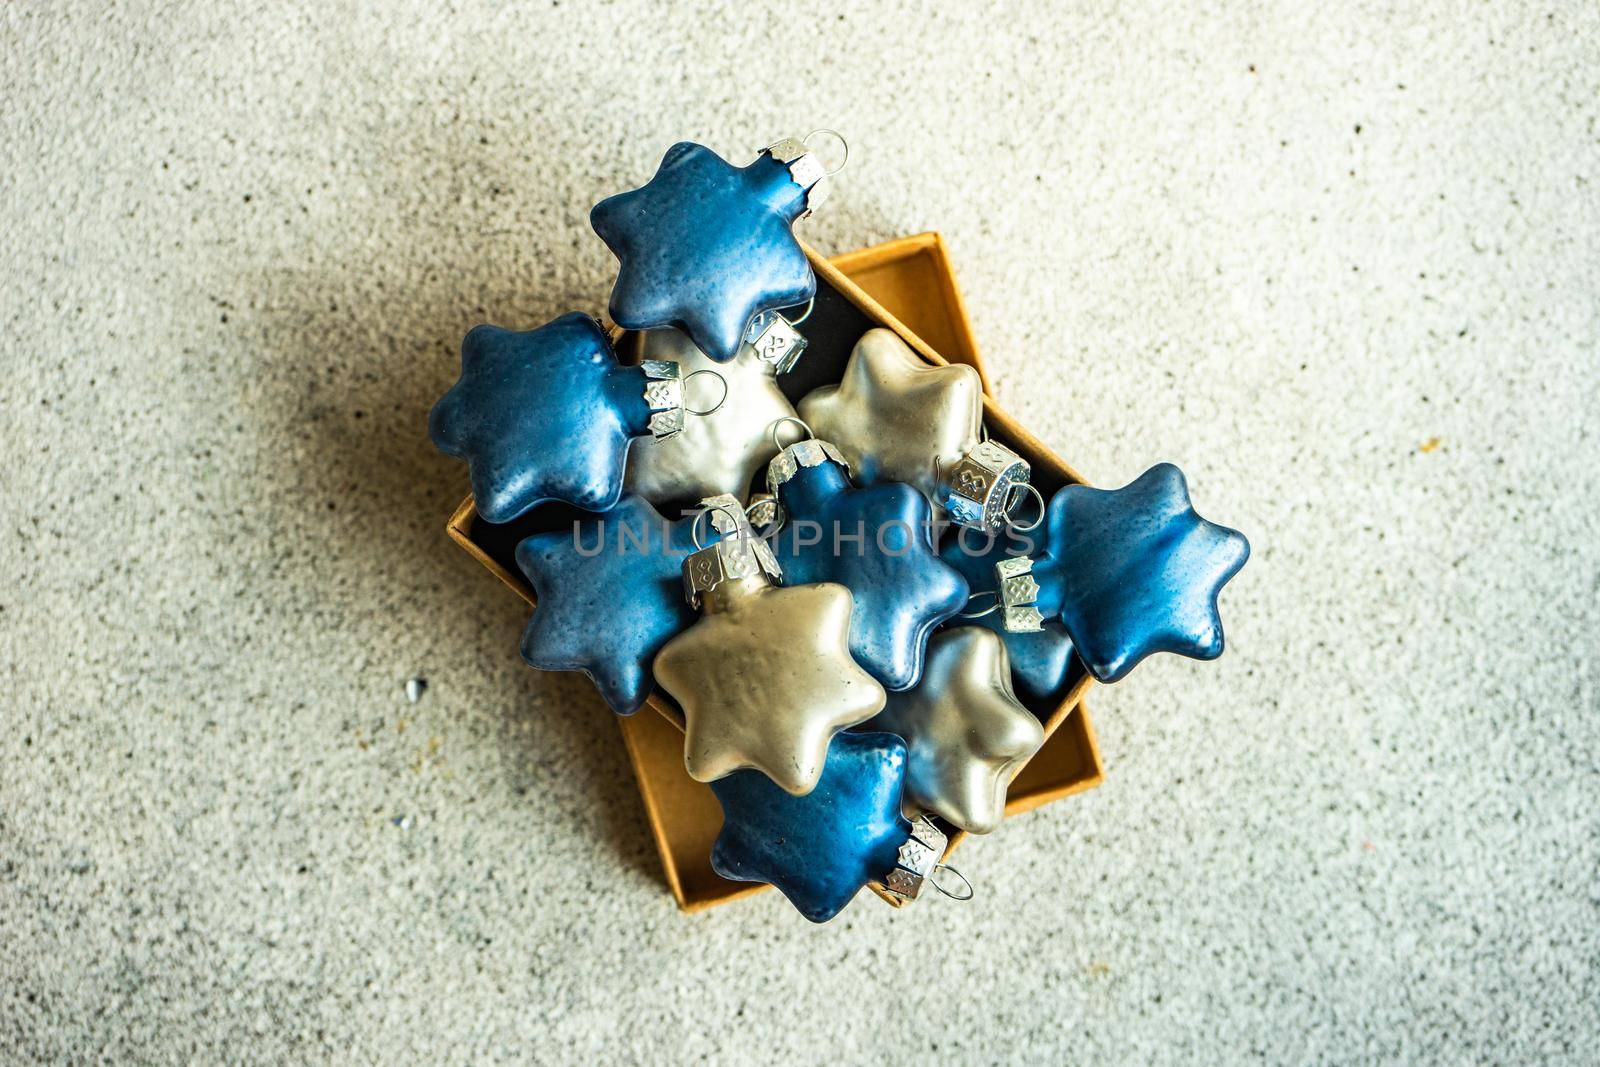 Rustic gift box with blue and silver star shaped balls on concrete background